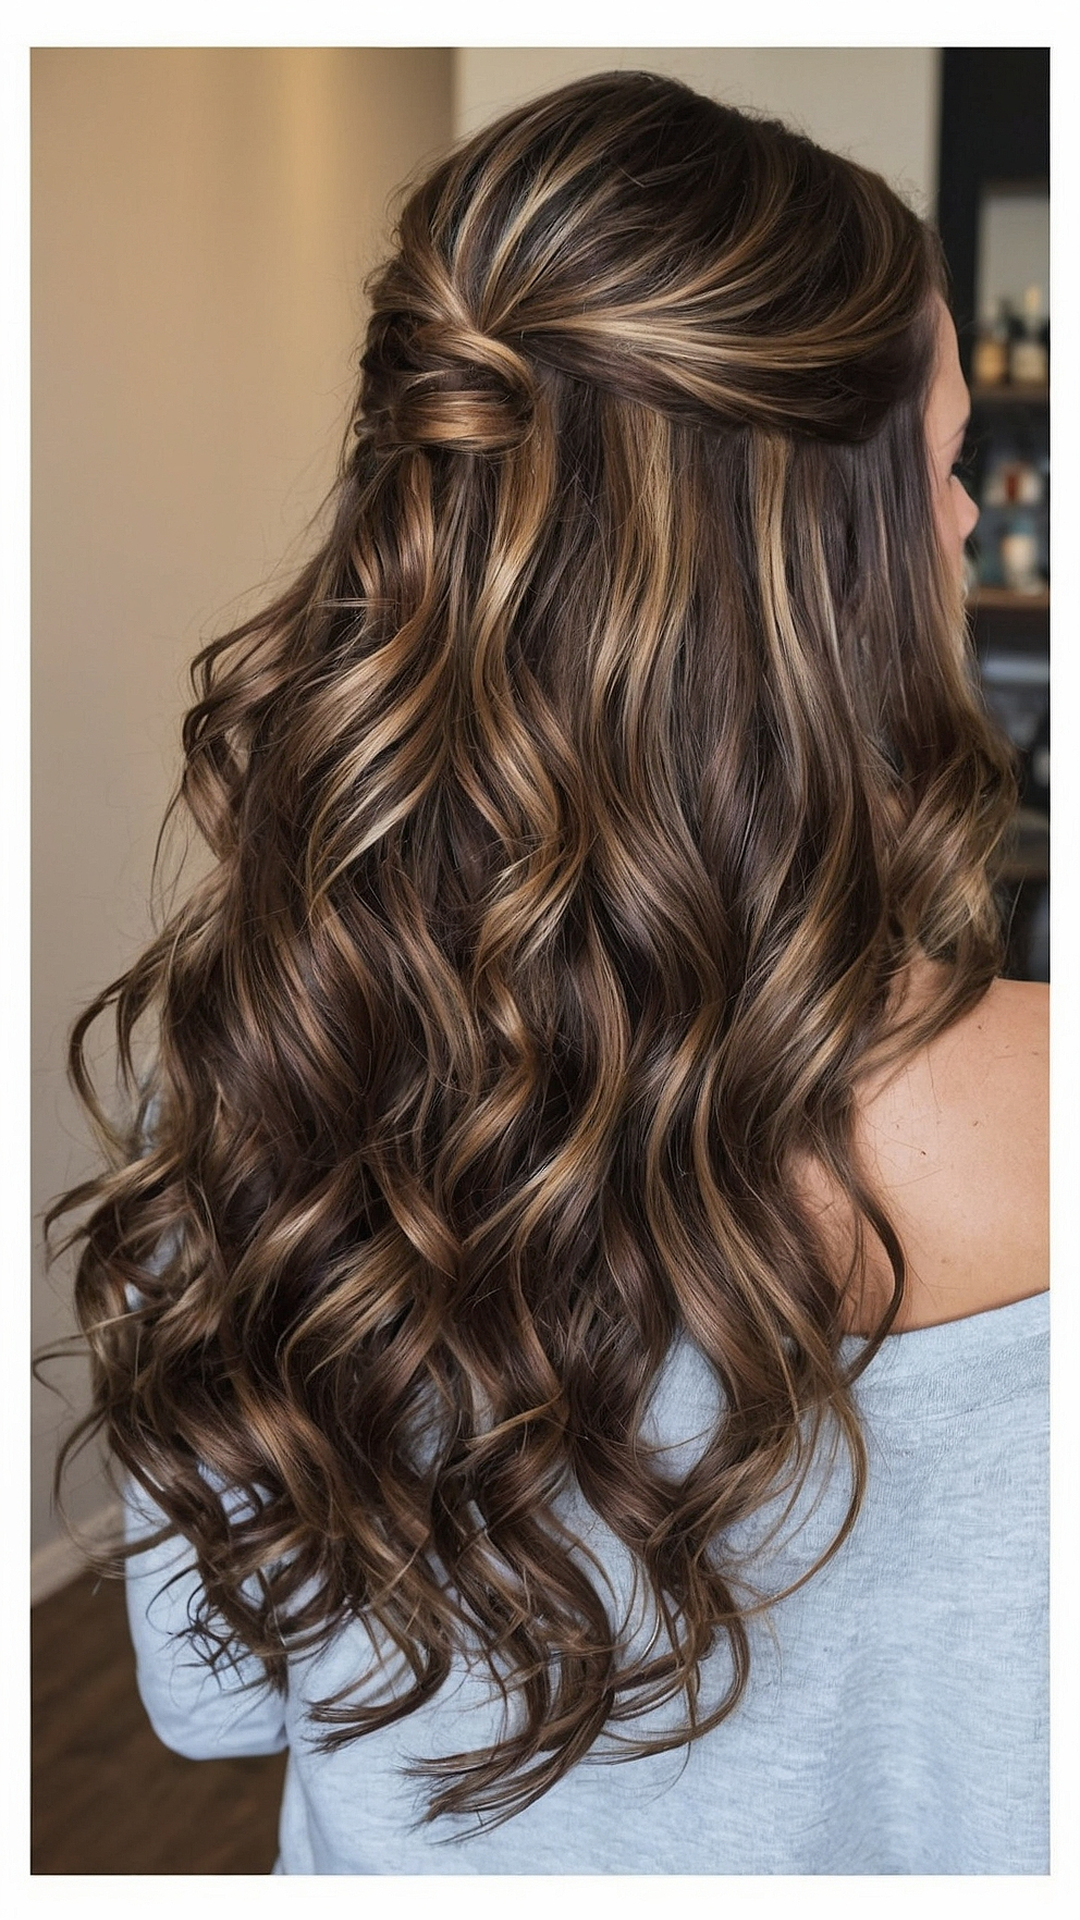 Curves and Curls: Wavy Hair Trend Alert